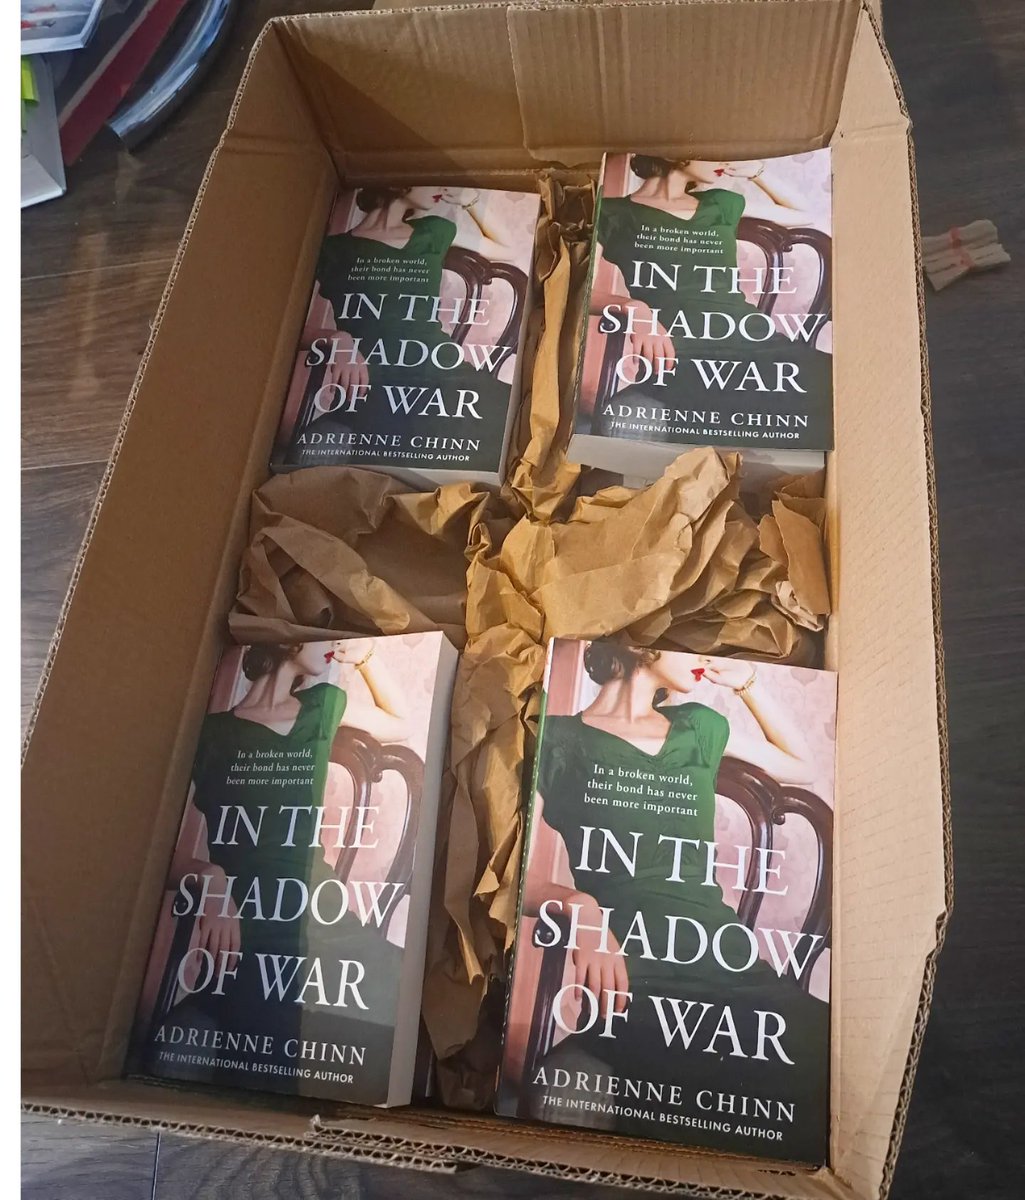 They've arrived! Woo hoo! @HardmanSwainson
#HistoricalFiction #HistoricalRomance #sagaseries #novel #bookclubs #bookclubbook #family #Sisters #1930s #fiction #drama #onemorechapter @HarperCollinsUK #readers #writers